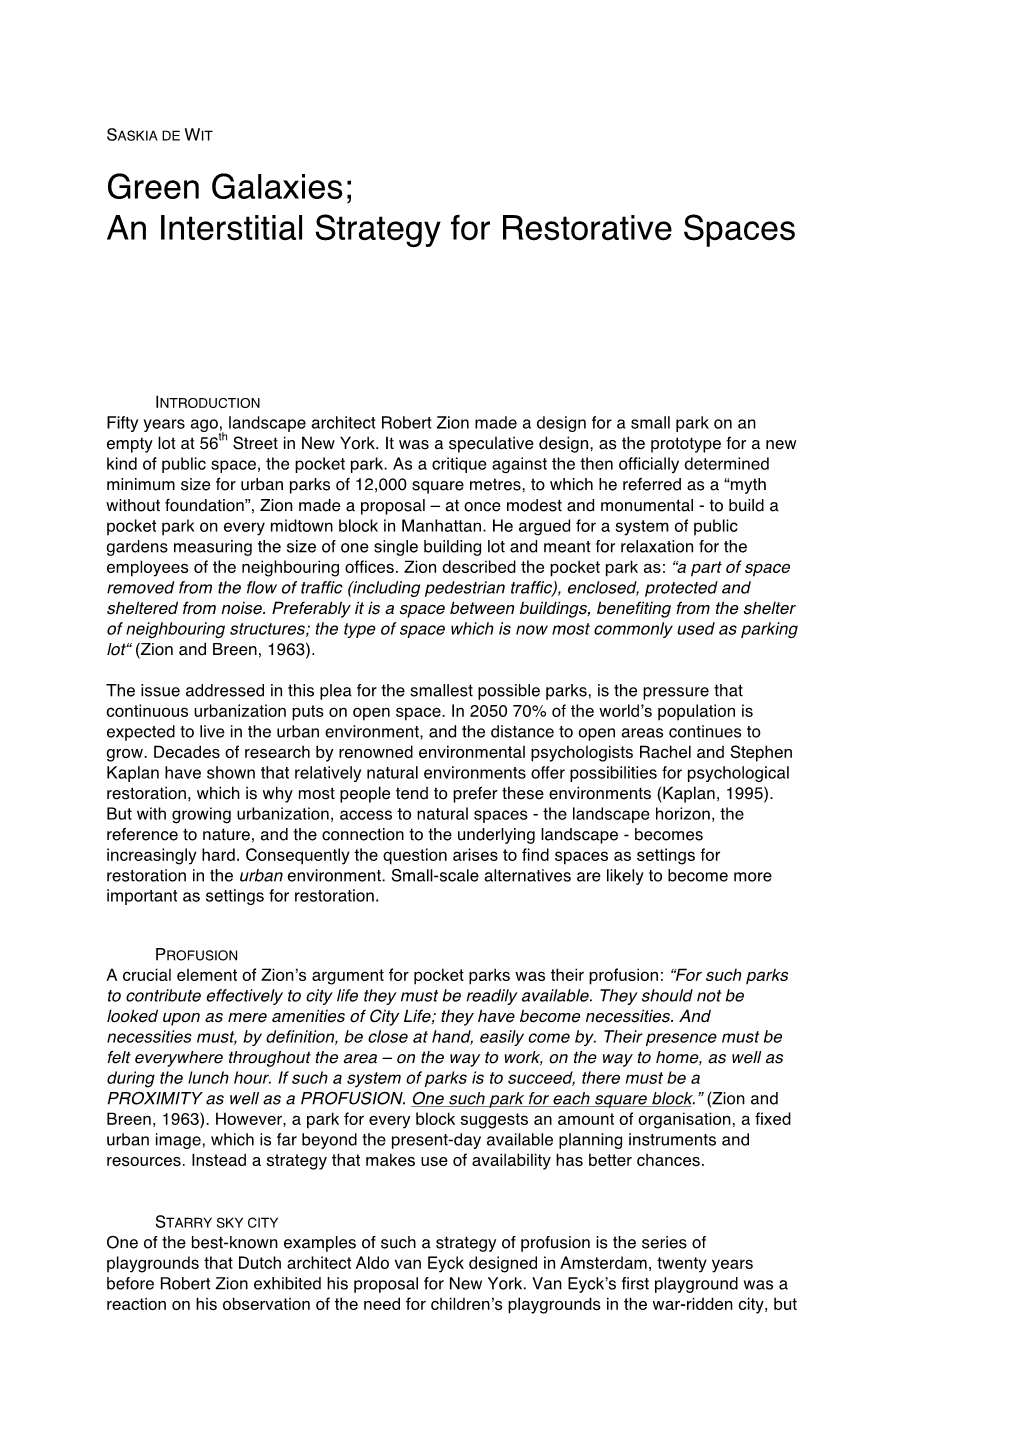 An Interstitial Strategy for Restorative Spaces